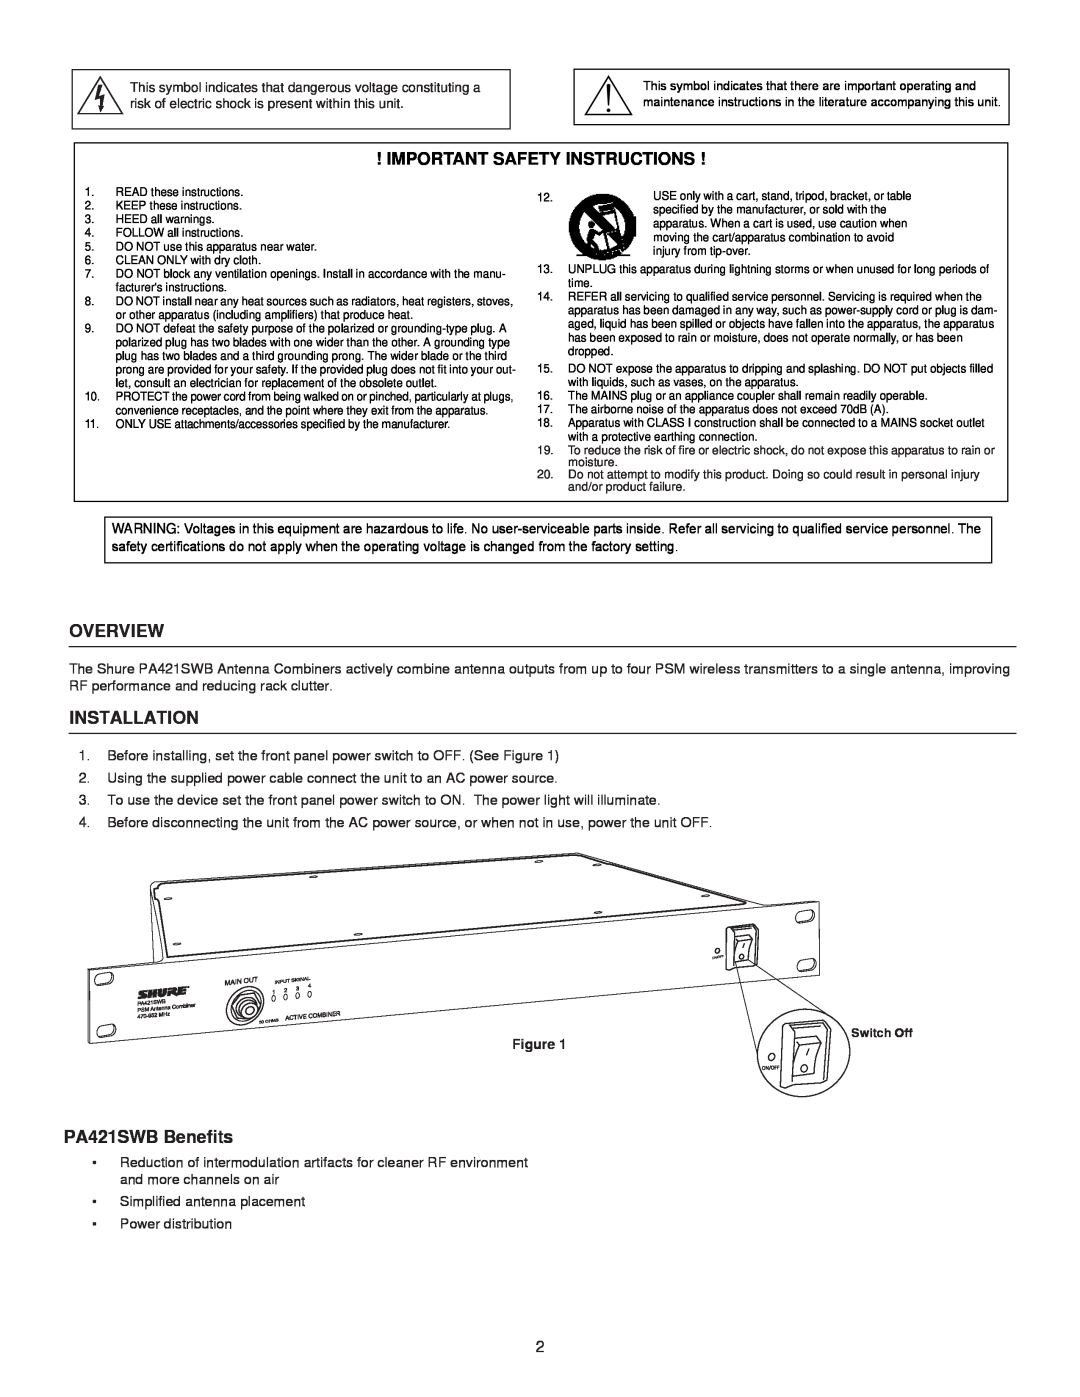 Shure manual Important Safety Instructions, Overview, Installation, PA421SWB Benefits 